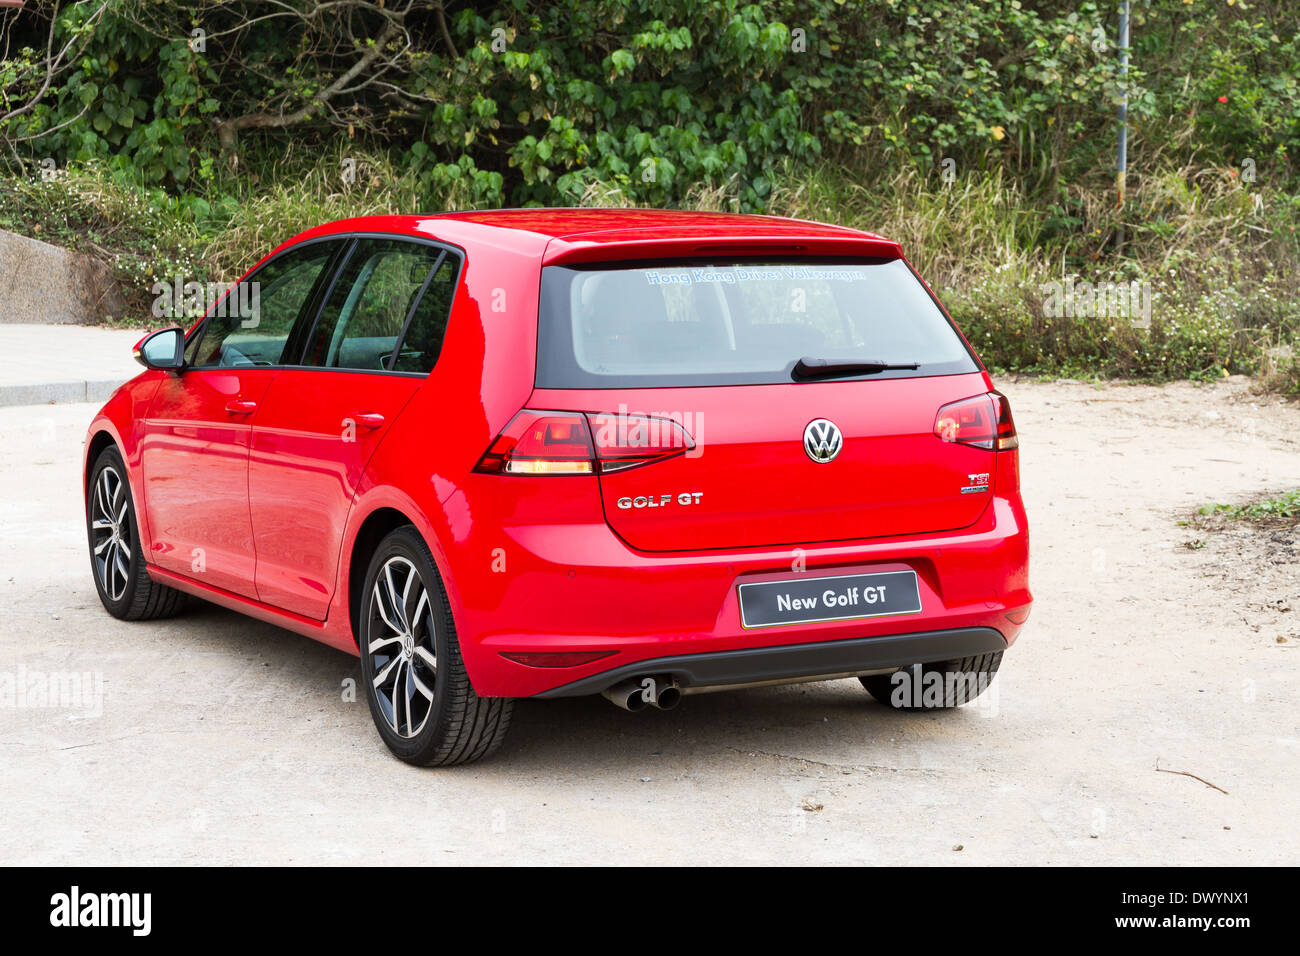 Volkswagen Golf VII GT 2013 Model with red colour Stock Photo - Alamy